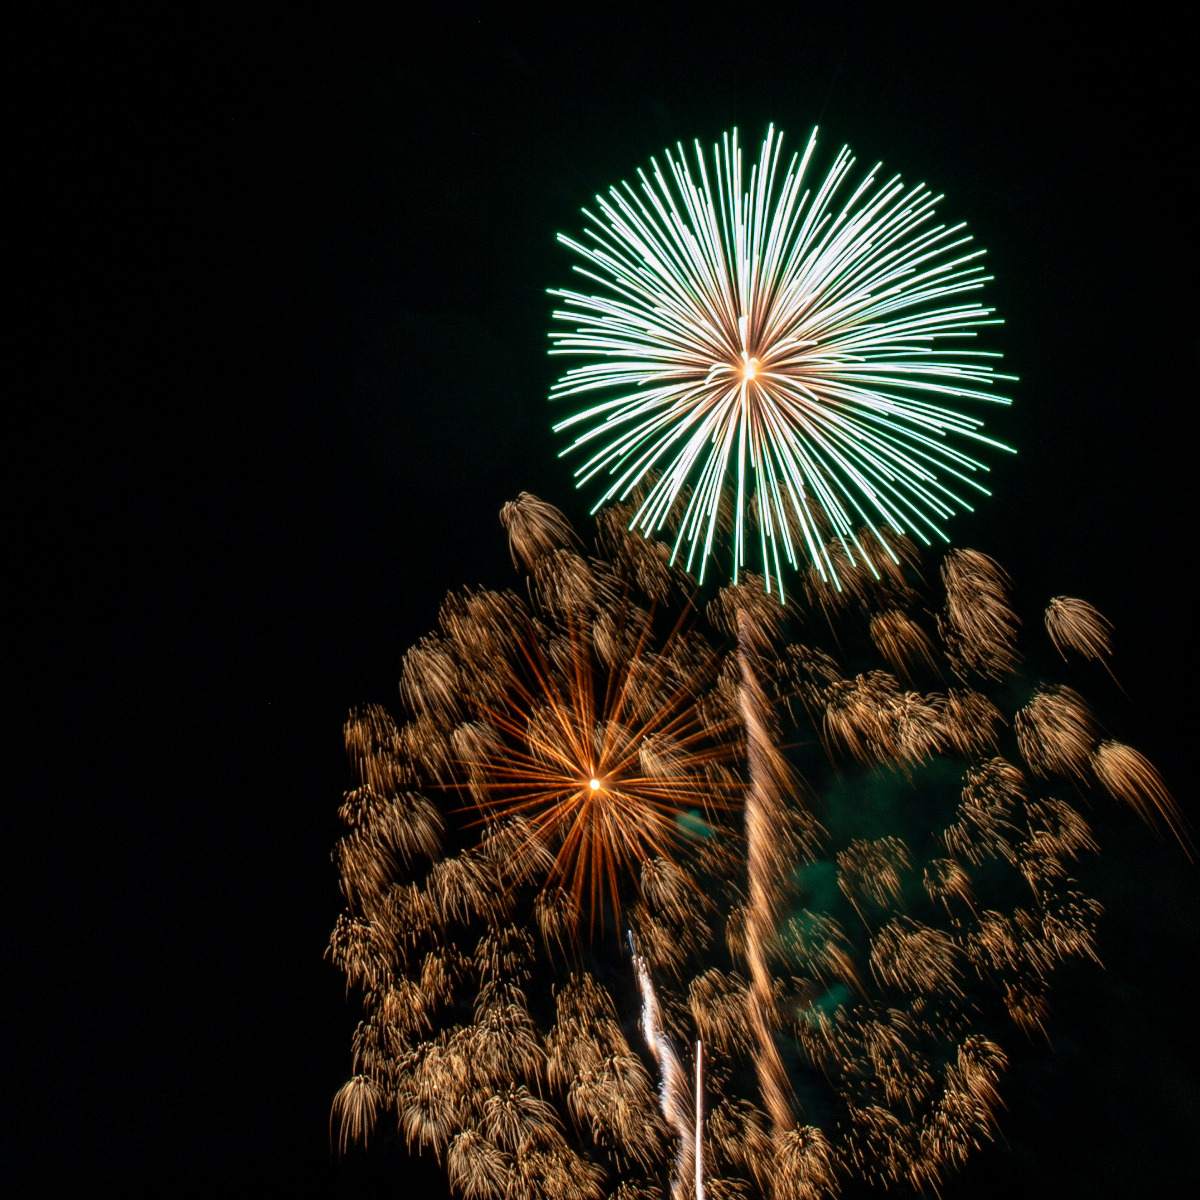 Detail of Fireworks by TJ Feeley